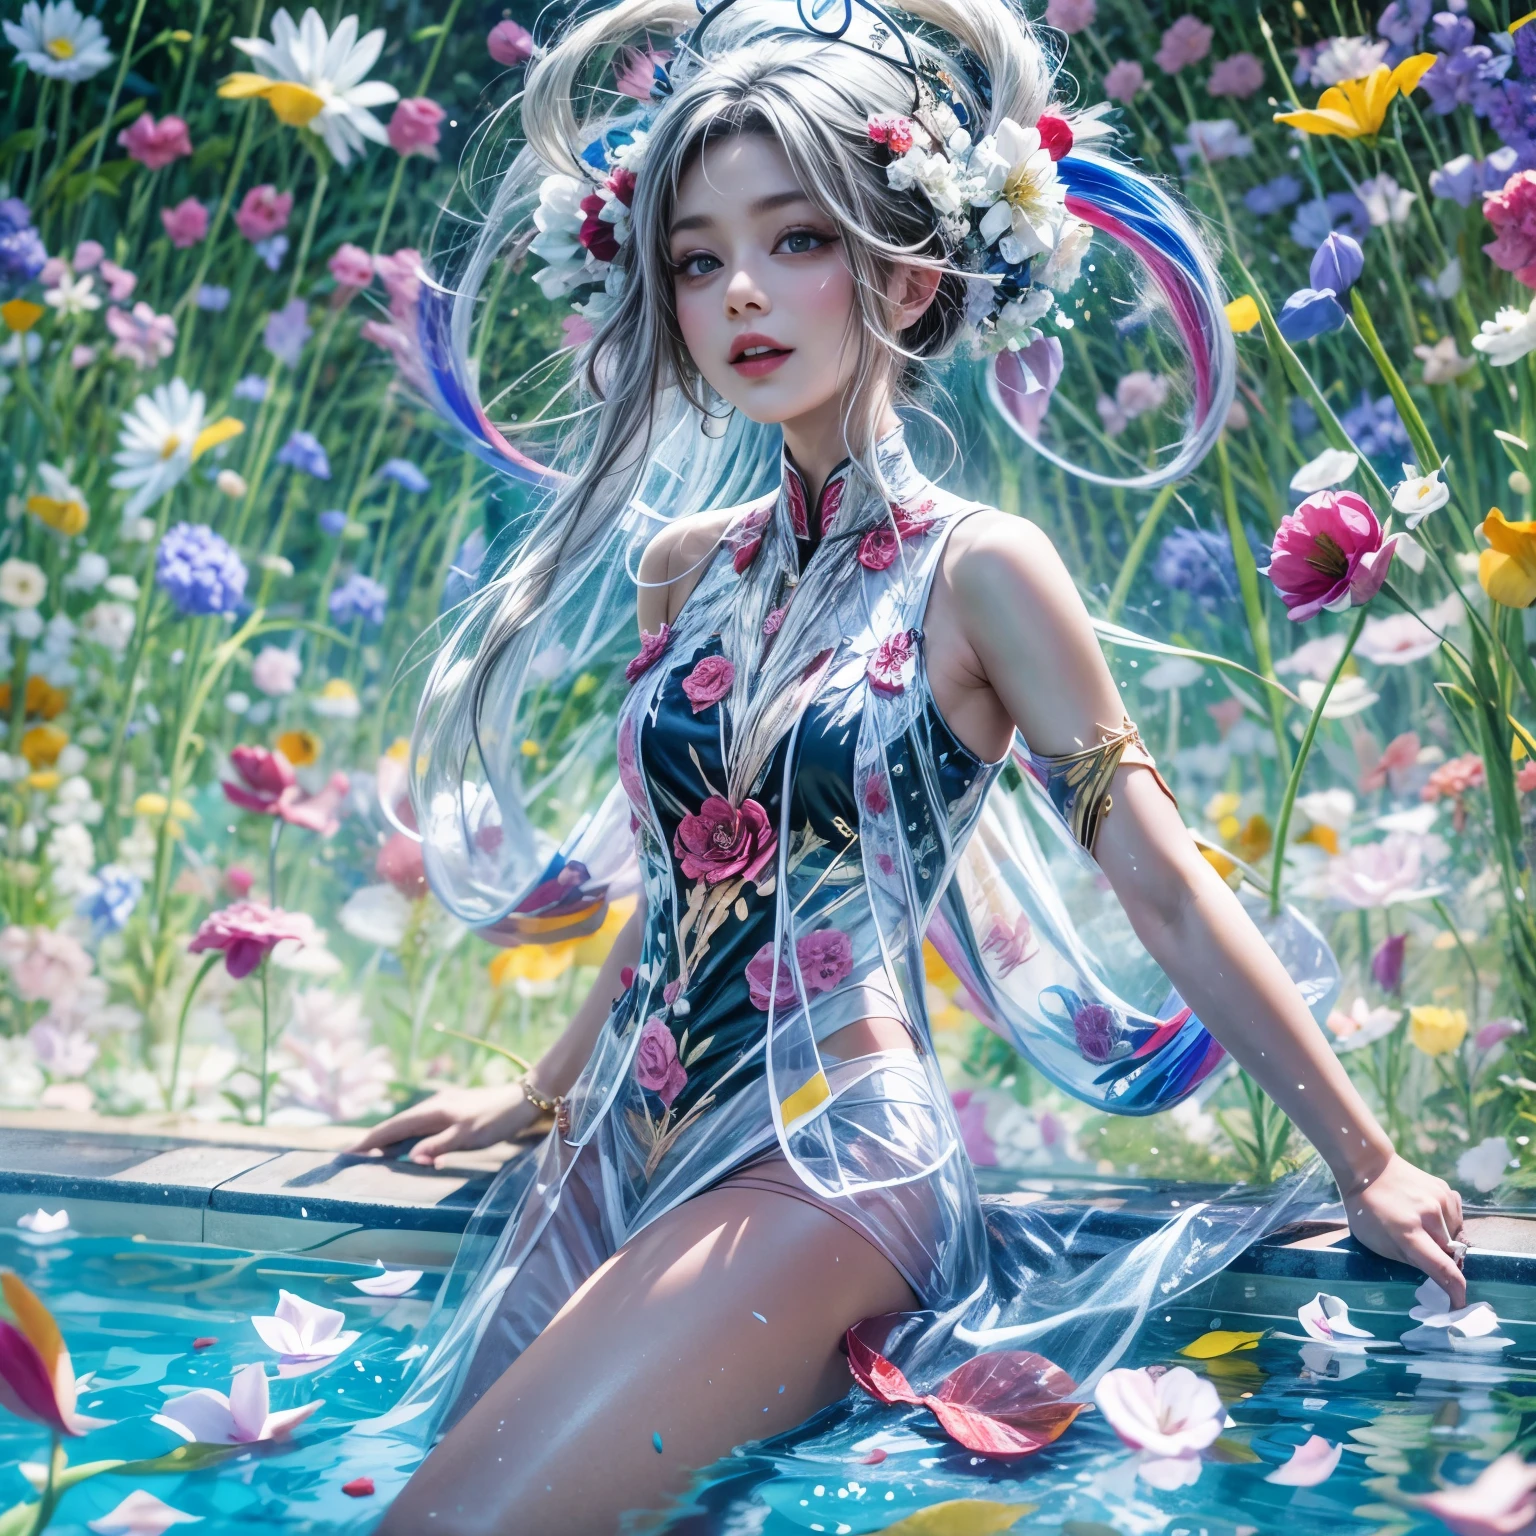 BloodRed, White in Pearly RainbowColors,ExtremelyDetailed(ProfessionalPhoto of Girl Floating in the Sky:1.37)ZoomLayer{Stunning|Mystic|GodRays|Haze}, 57th floor infinity pool in the urban forest. (Masterpiece 8K TopQuality:1.2)(ExtremelyDetailed NOGIZAKA face:1.37) ElaboratePupil with (SparklingHighlights:1.28) DoubleEyelids with Voluminous LongEyelashes PUNIPUNI RosyCheeks (Joyful Expressions LifeLike Rendering) MotionBlur  BREAK  (Acutance:0.77) PUNIPUNI Radiant Impeccable PearlSkin with Transparency White(Skinny SchoolSwimwear) {(HiddenHand)|((Corrected BabyLike Hand))} Whole Body Proportions and all limbs are Anatomically Accurate, {Carnation|Tulips|(Rose)} [FlowerWreath WrappedBody Full of Flowers Covering girl's body] {((Dazzling RainbowColorHorizon))|ColorfulSky|ColoredClouds|(Starly Particles)}(extra limbs:-1.4)(Not Detailed Face:-1.37)(Not Detailed Hand:-1.28), Drawing infinity pool reference to the rooftop of Marina Bay Sands